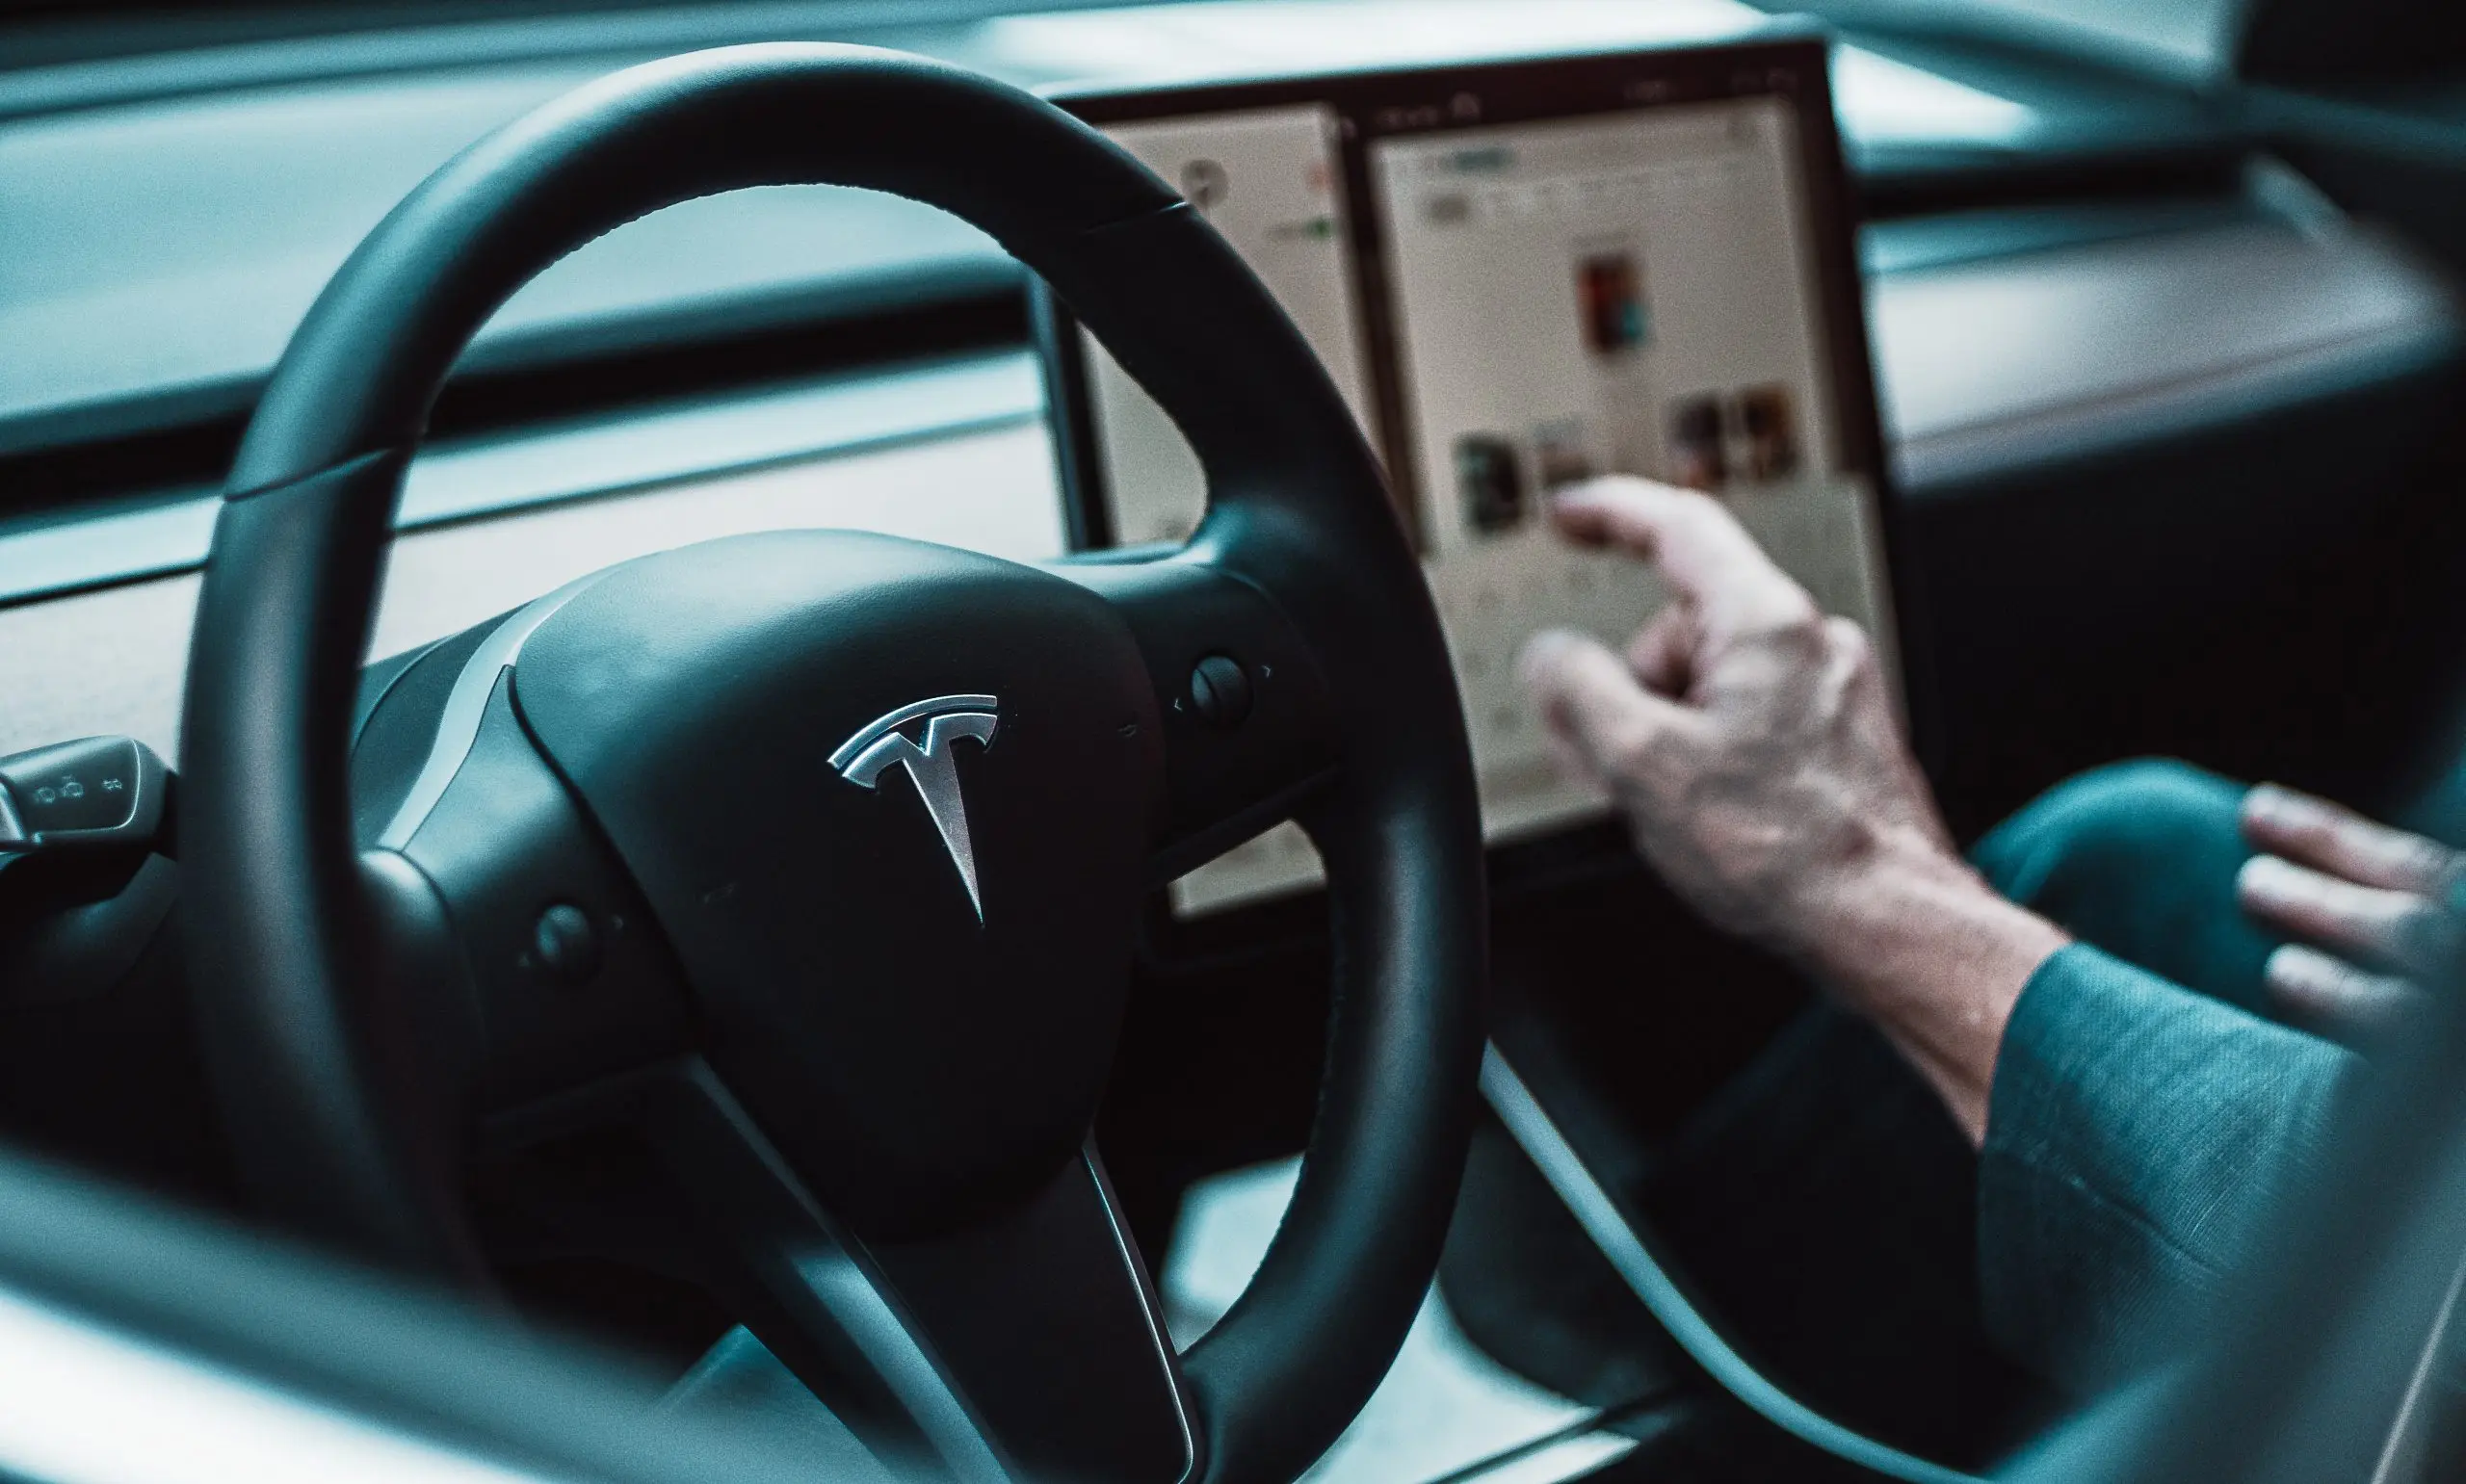 Tesla's Autonomy Ambitions Under Legal Scrutiny A Deep Dive into the Ongoing Lawsuit and Musk's Vision for Self-Driving Cars